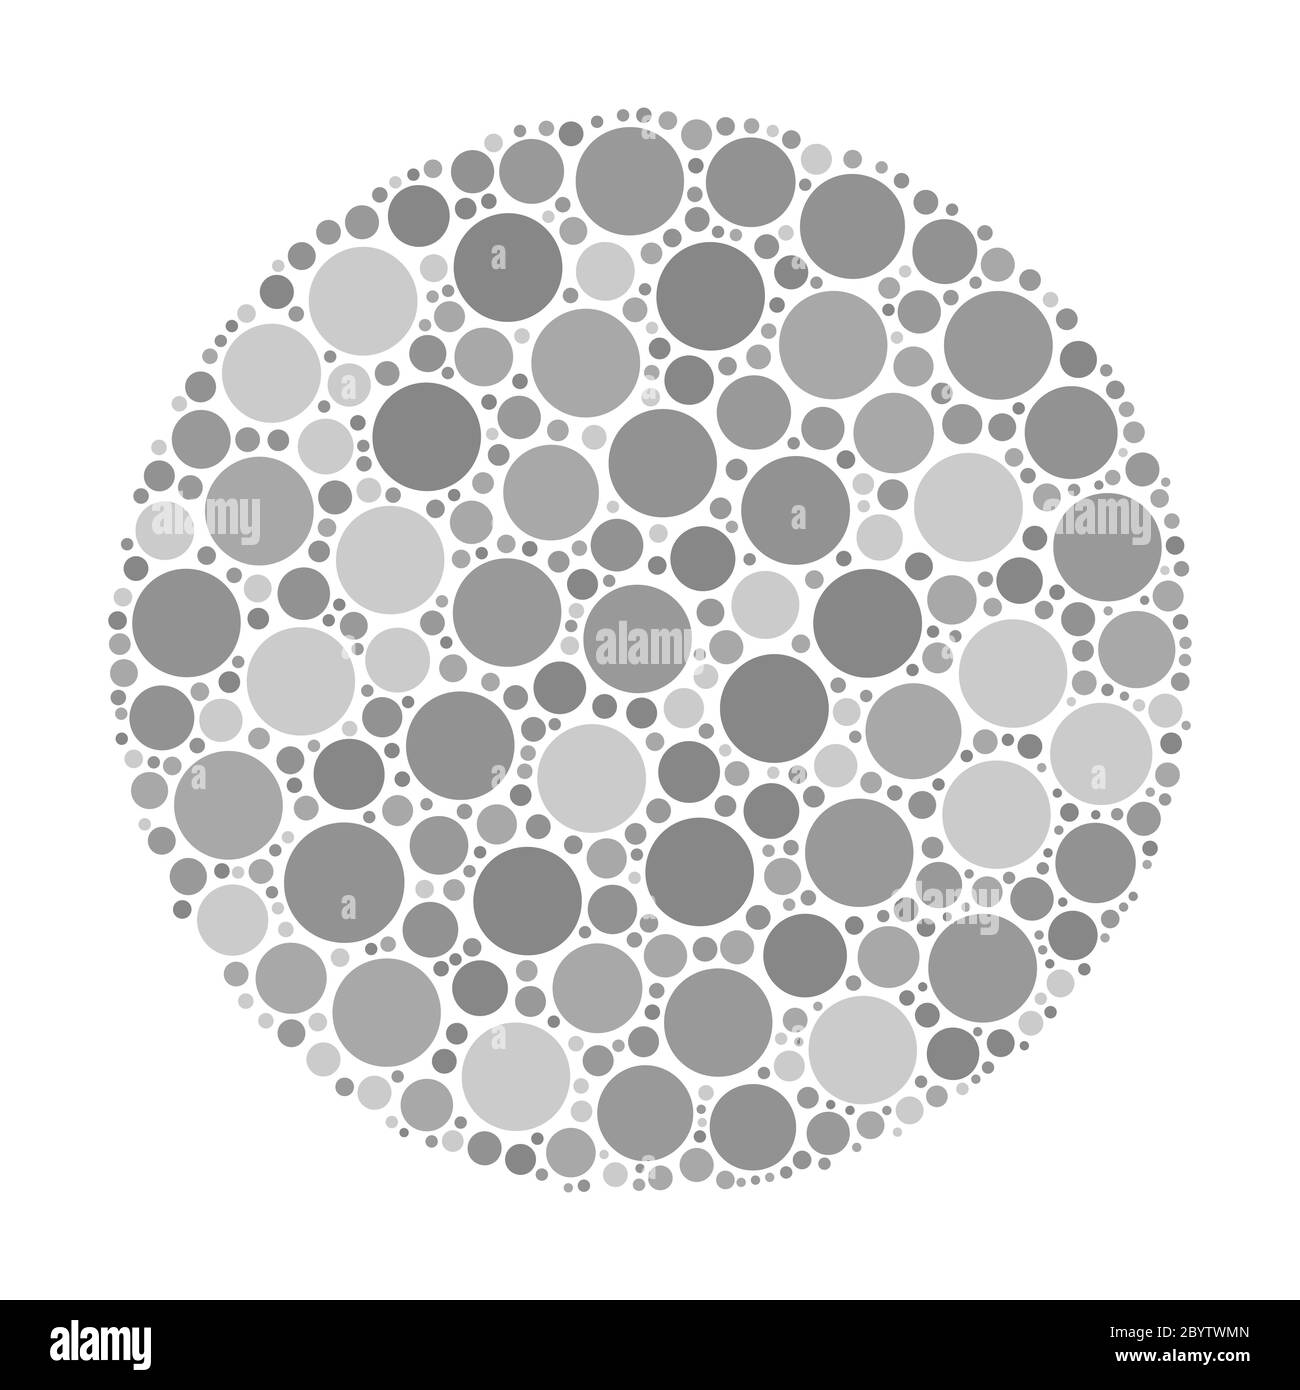 Circle made of dots in shades of grey. Abstract vector illustration inspired by medical Ishirara test for color-blindness. Stock Vector